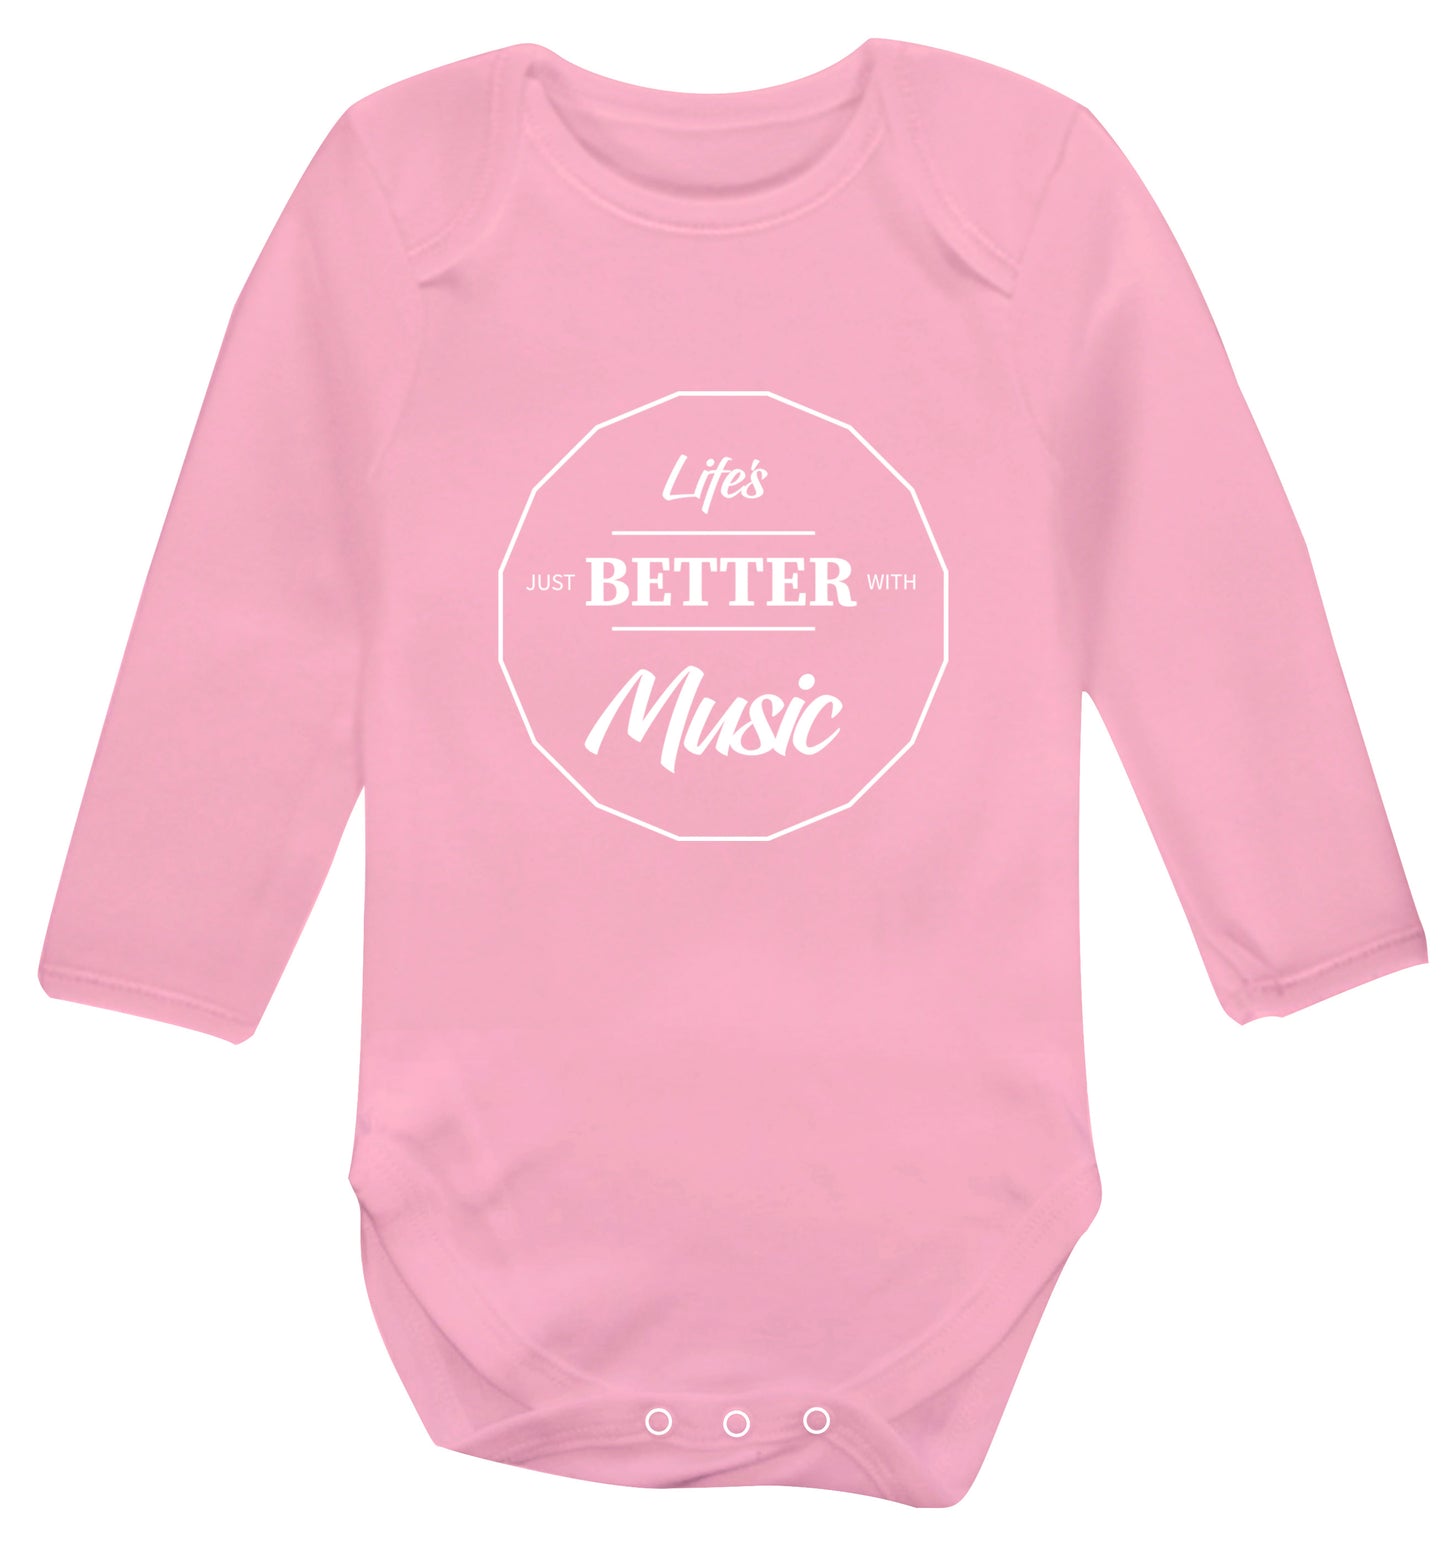 Life is Better With Music Baby Vest long sleeved pale pink 6-12 months